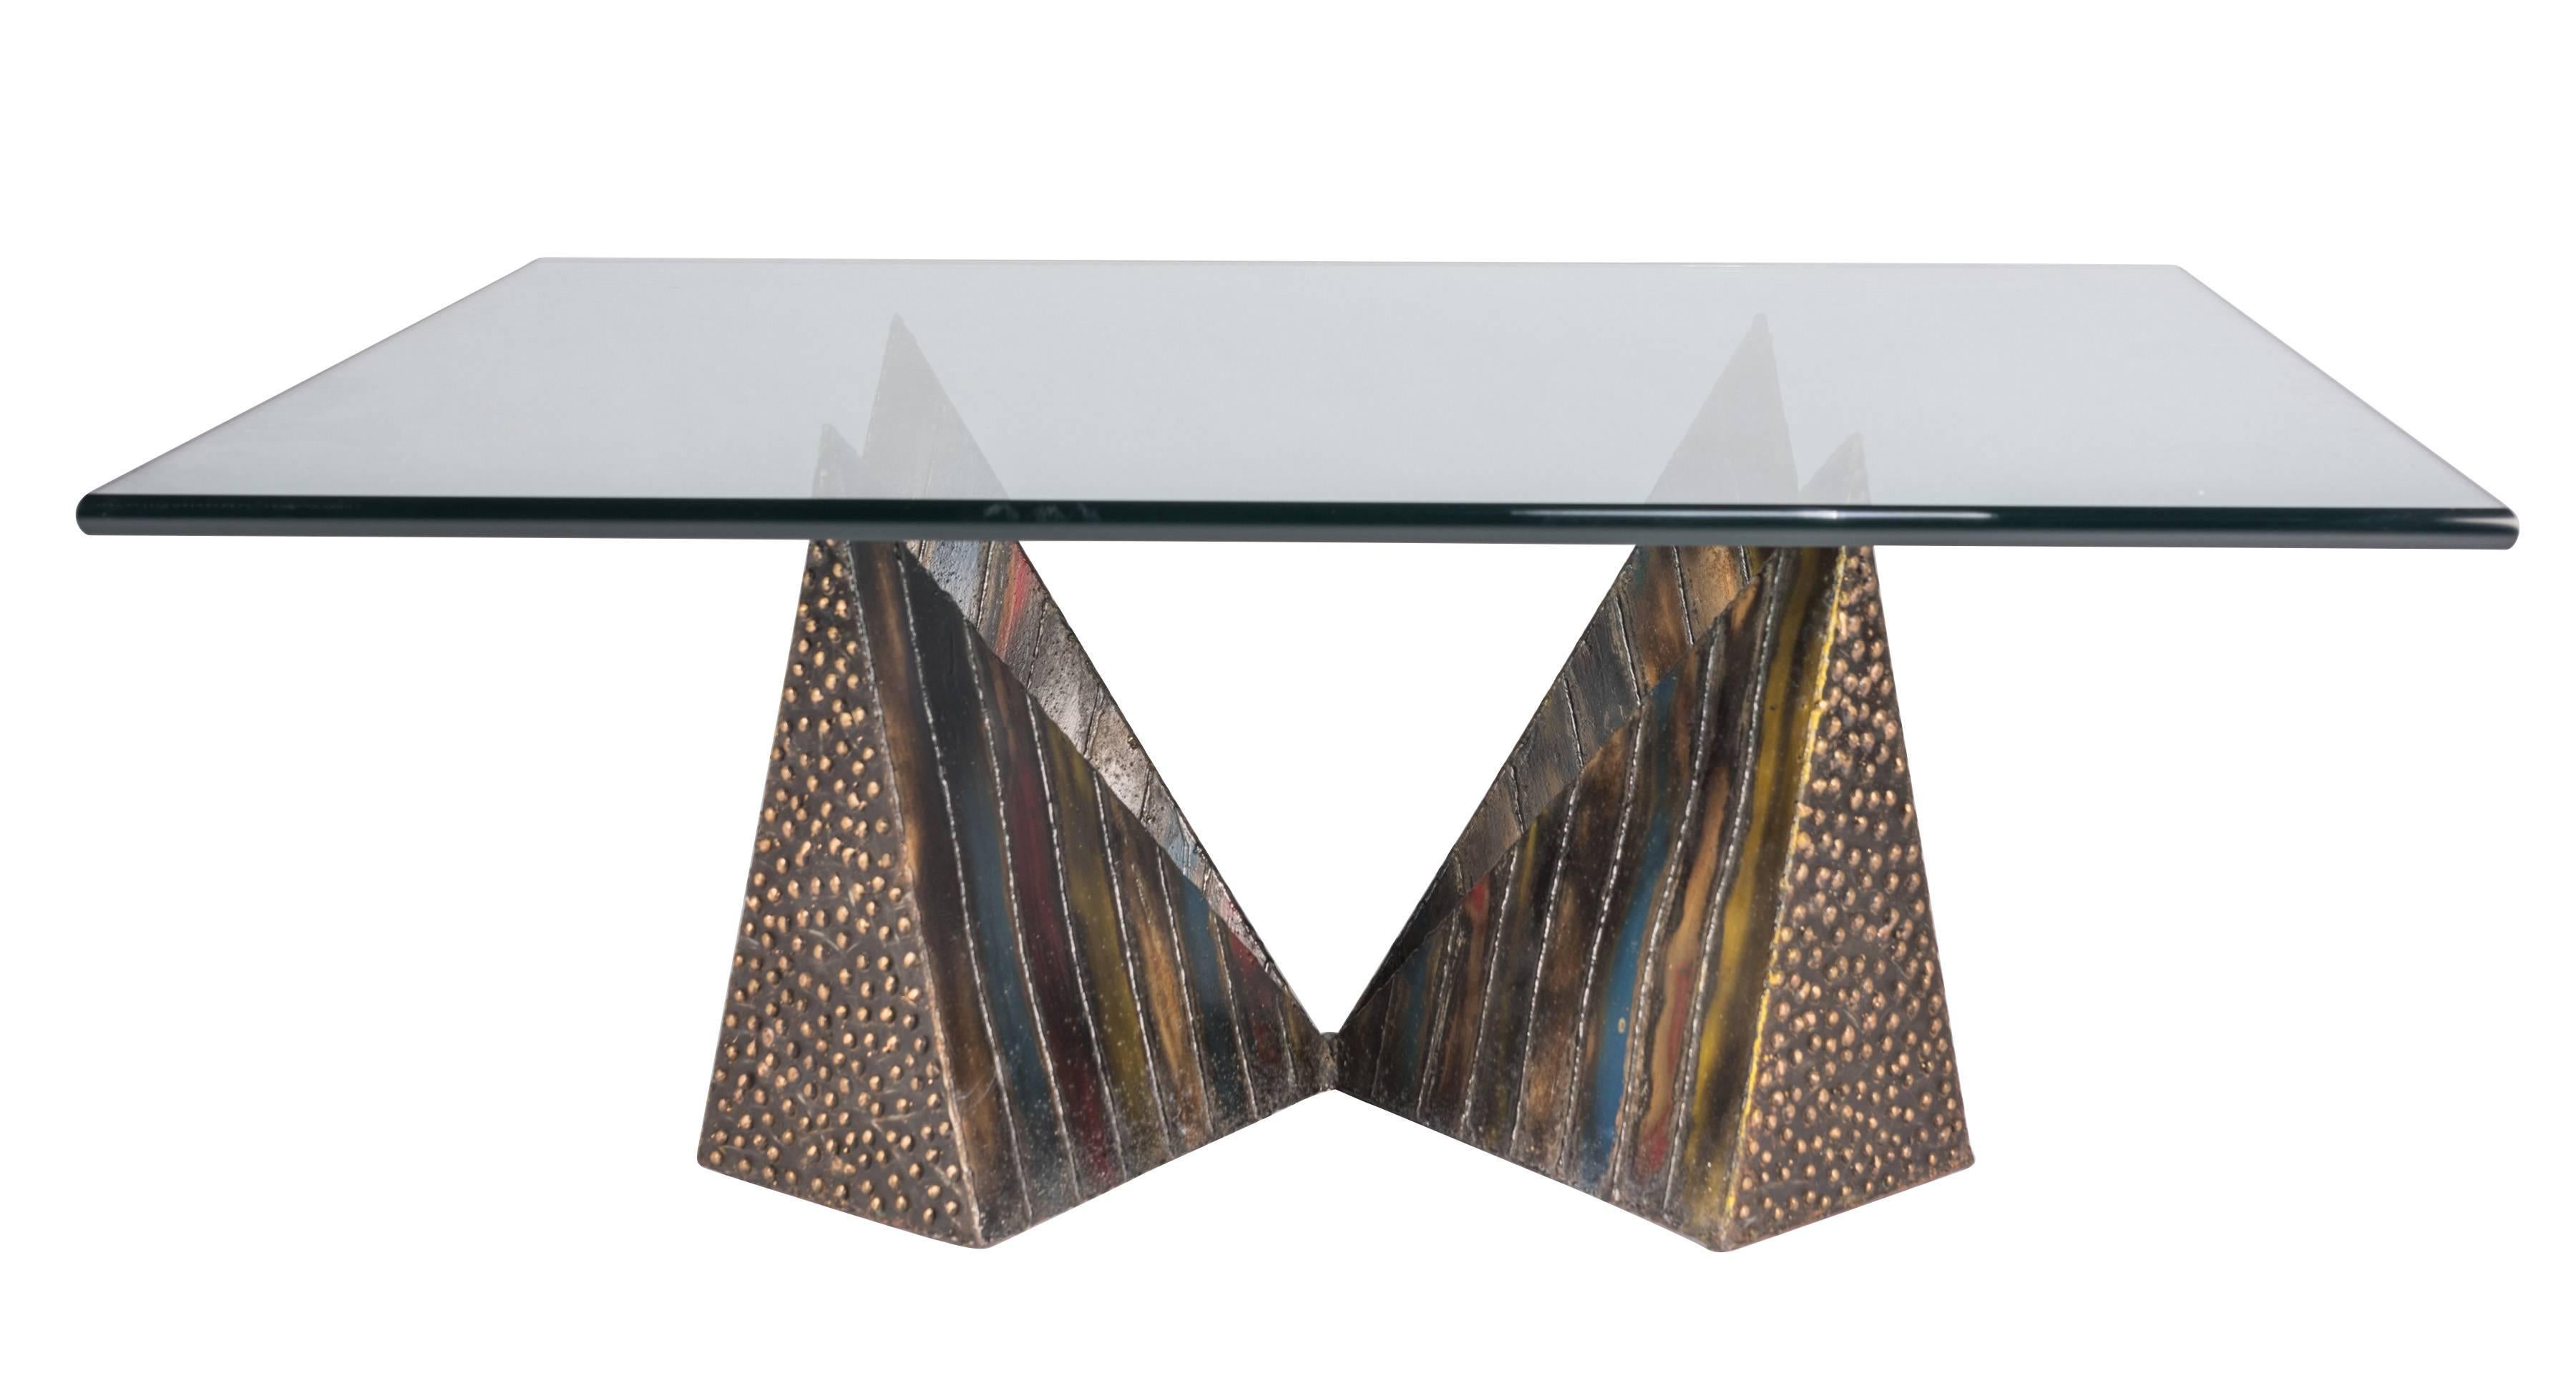 Pyramid coffee table by Paul Evans with his iconic patinated steel base and a glass top. This example from 1973 features especially expressive and bright patination colors. A rare example of the iconic form.